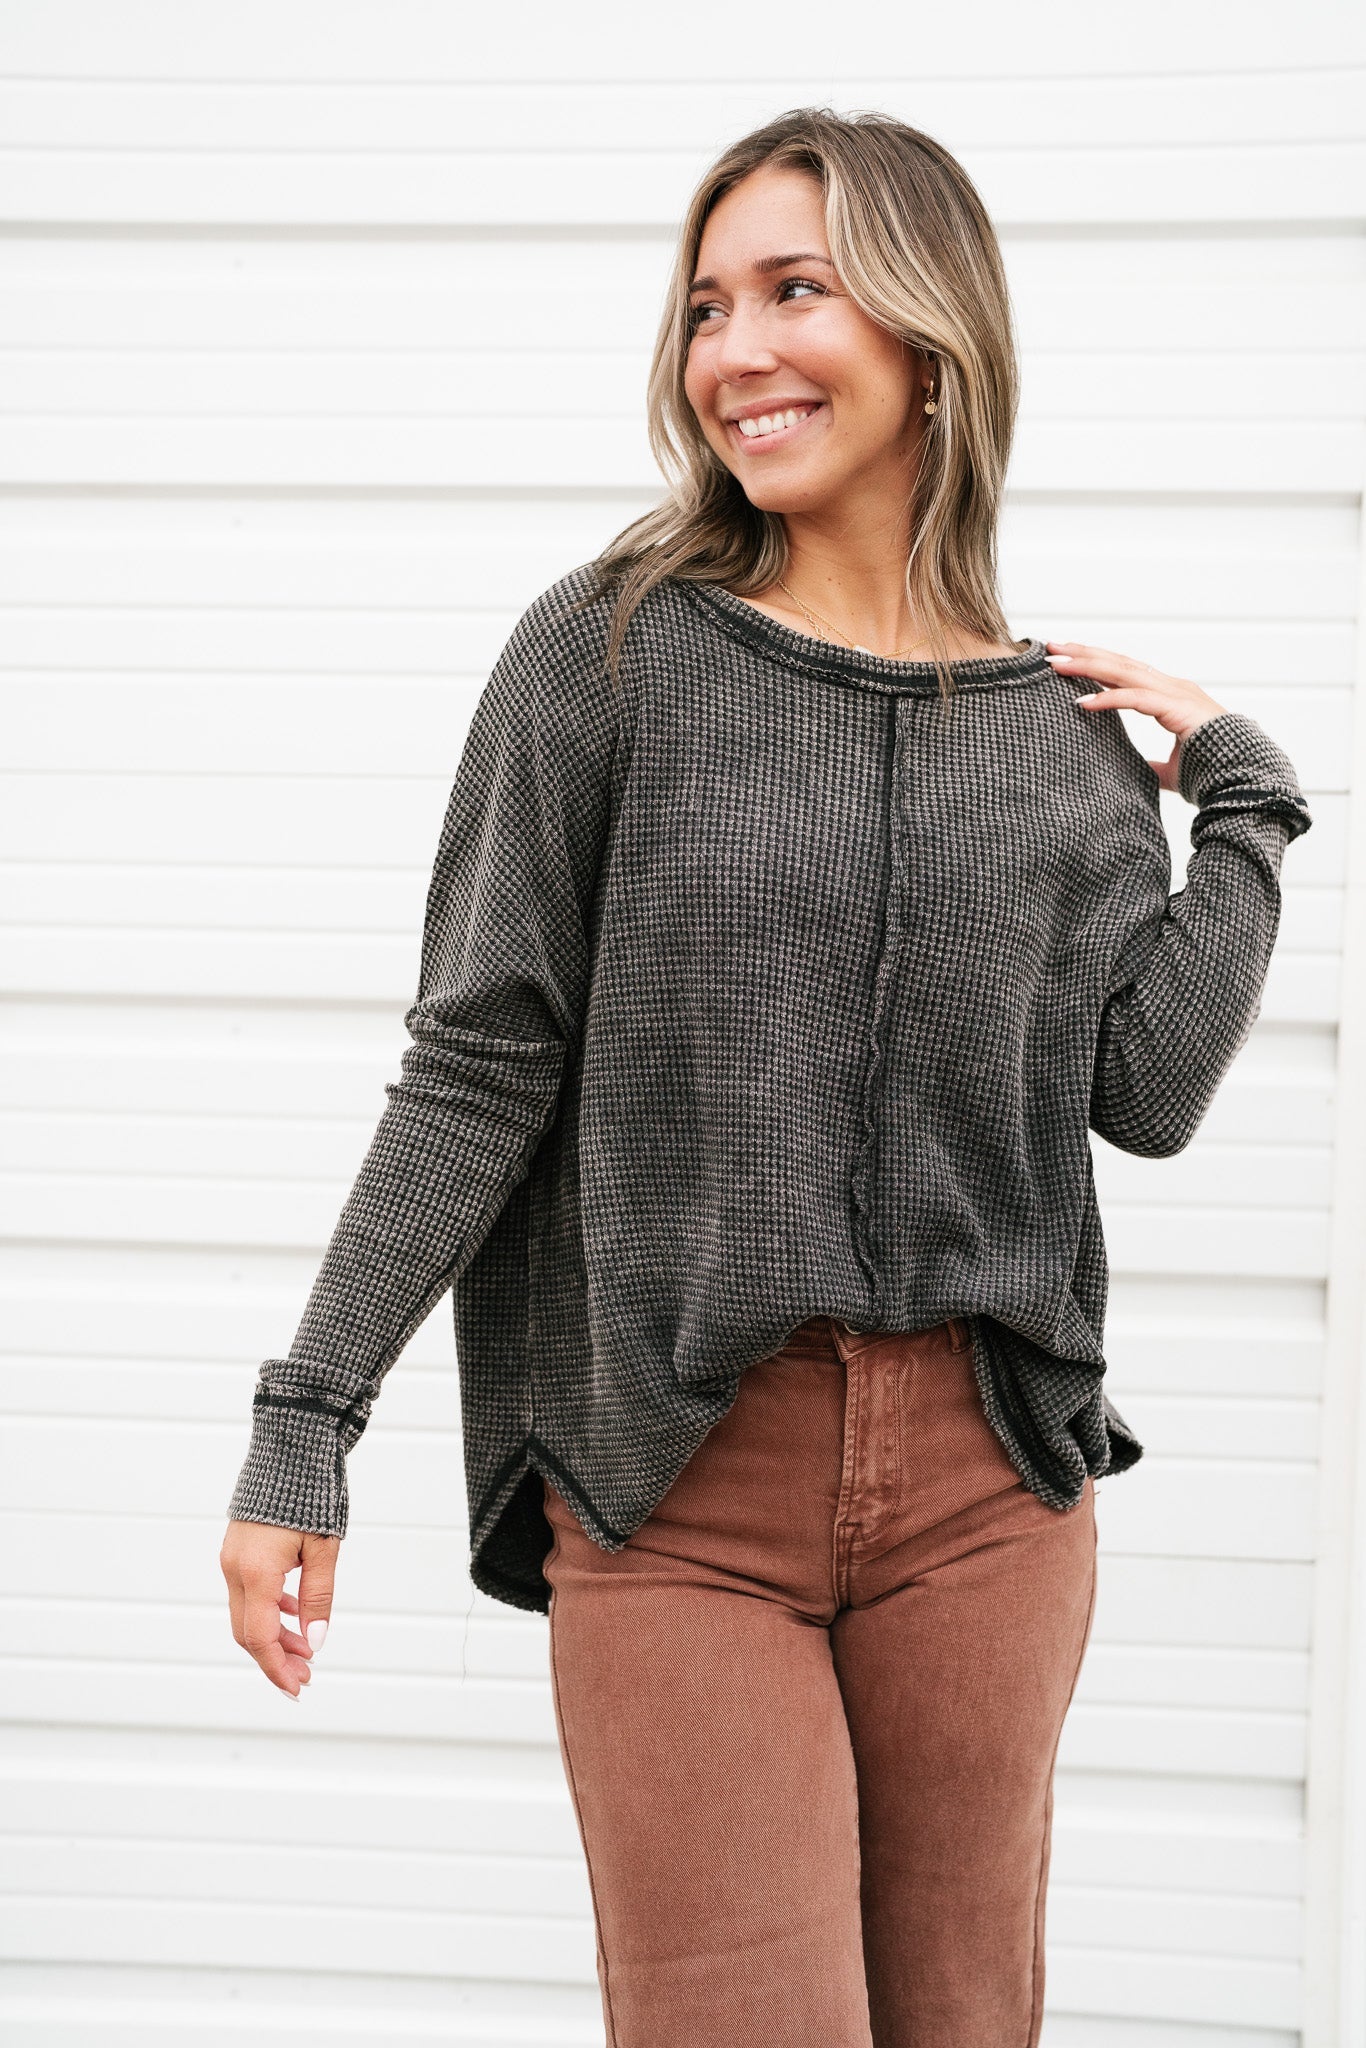 Over The Moon Waffle Knit Top